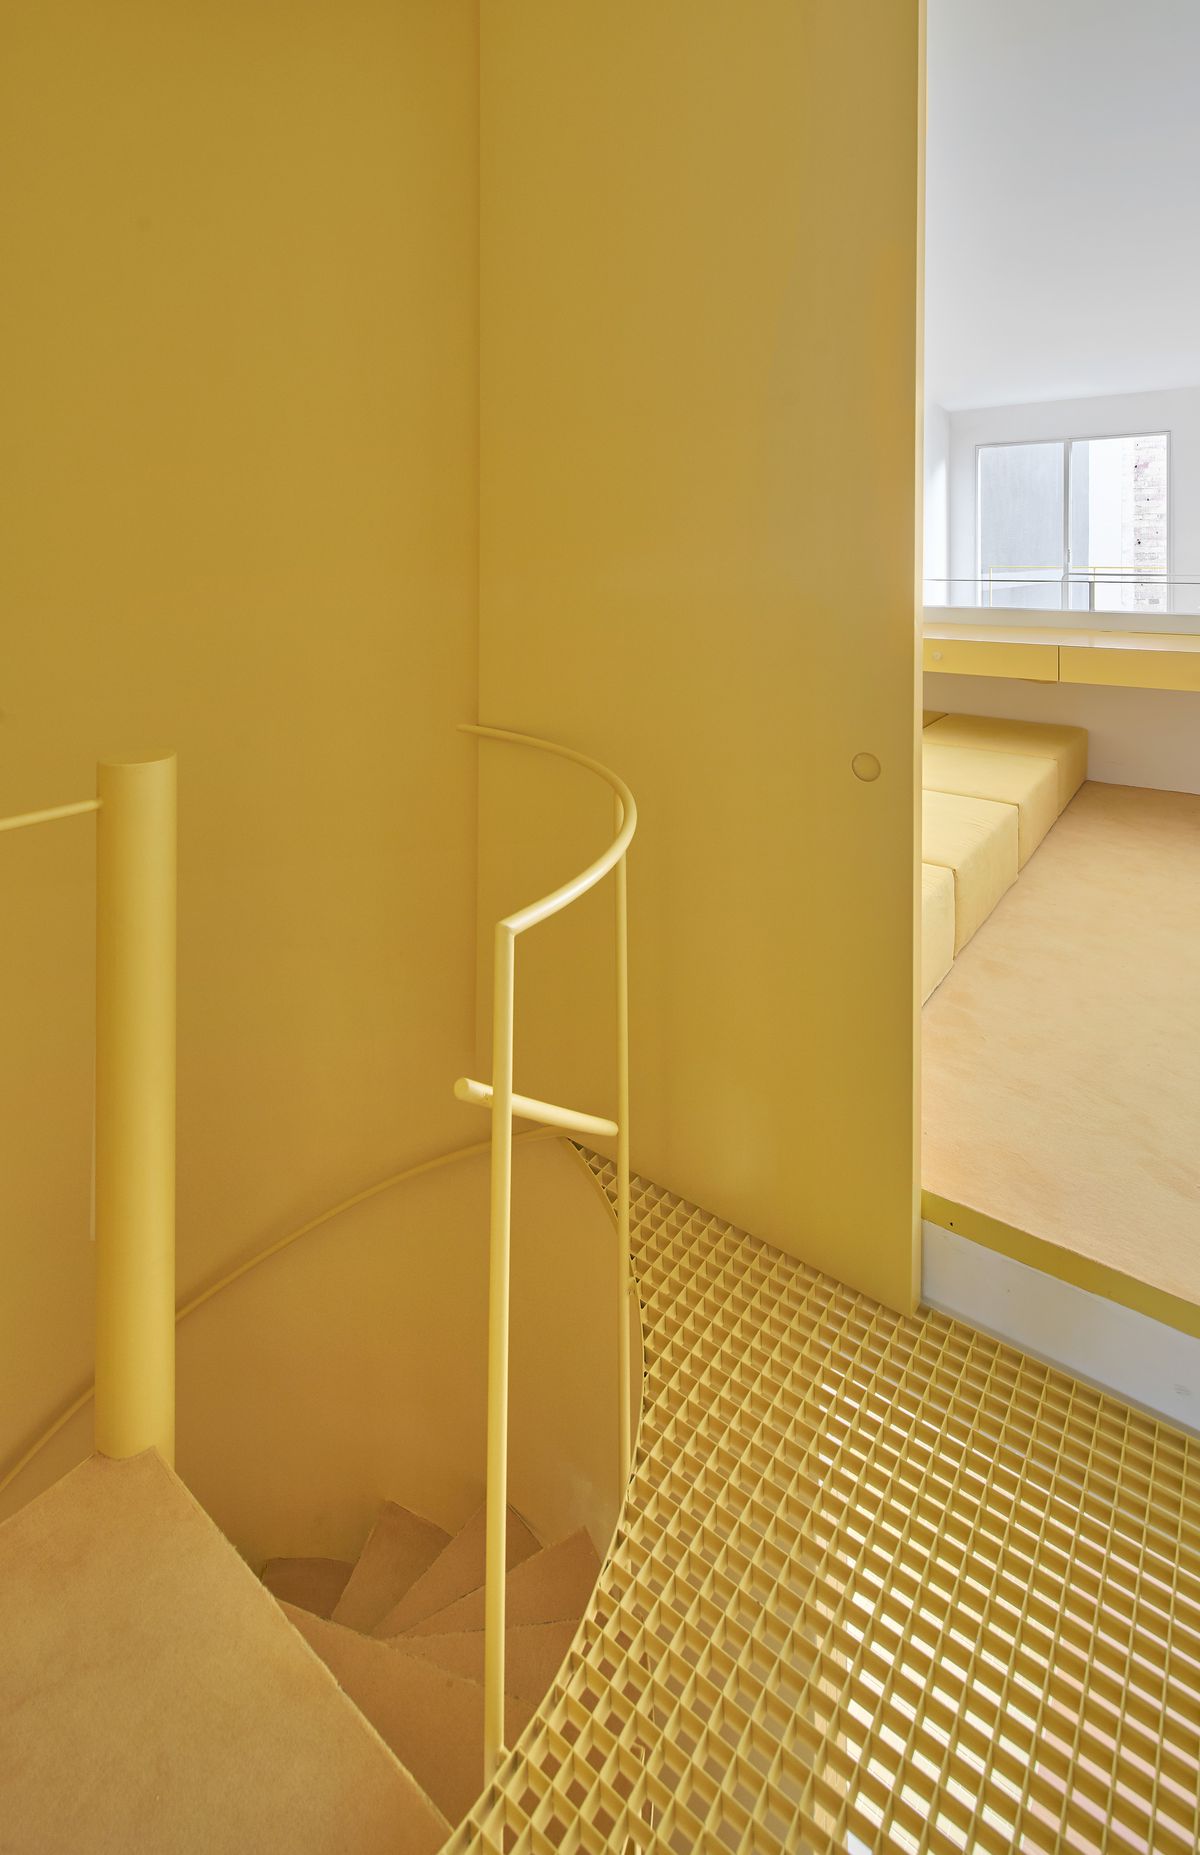 Staircase painted in yellow with grates and curved staircase. 